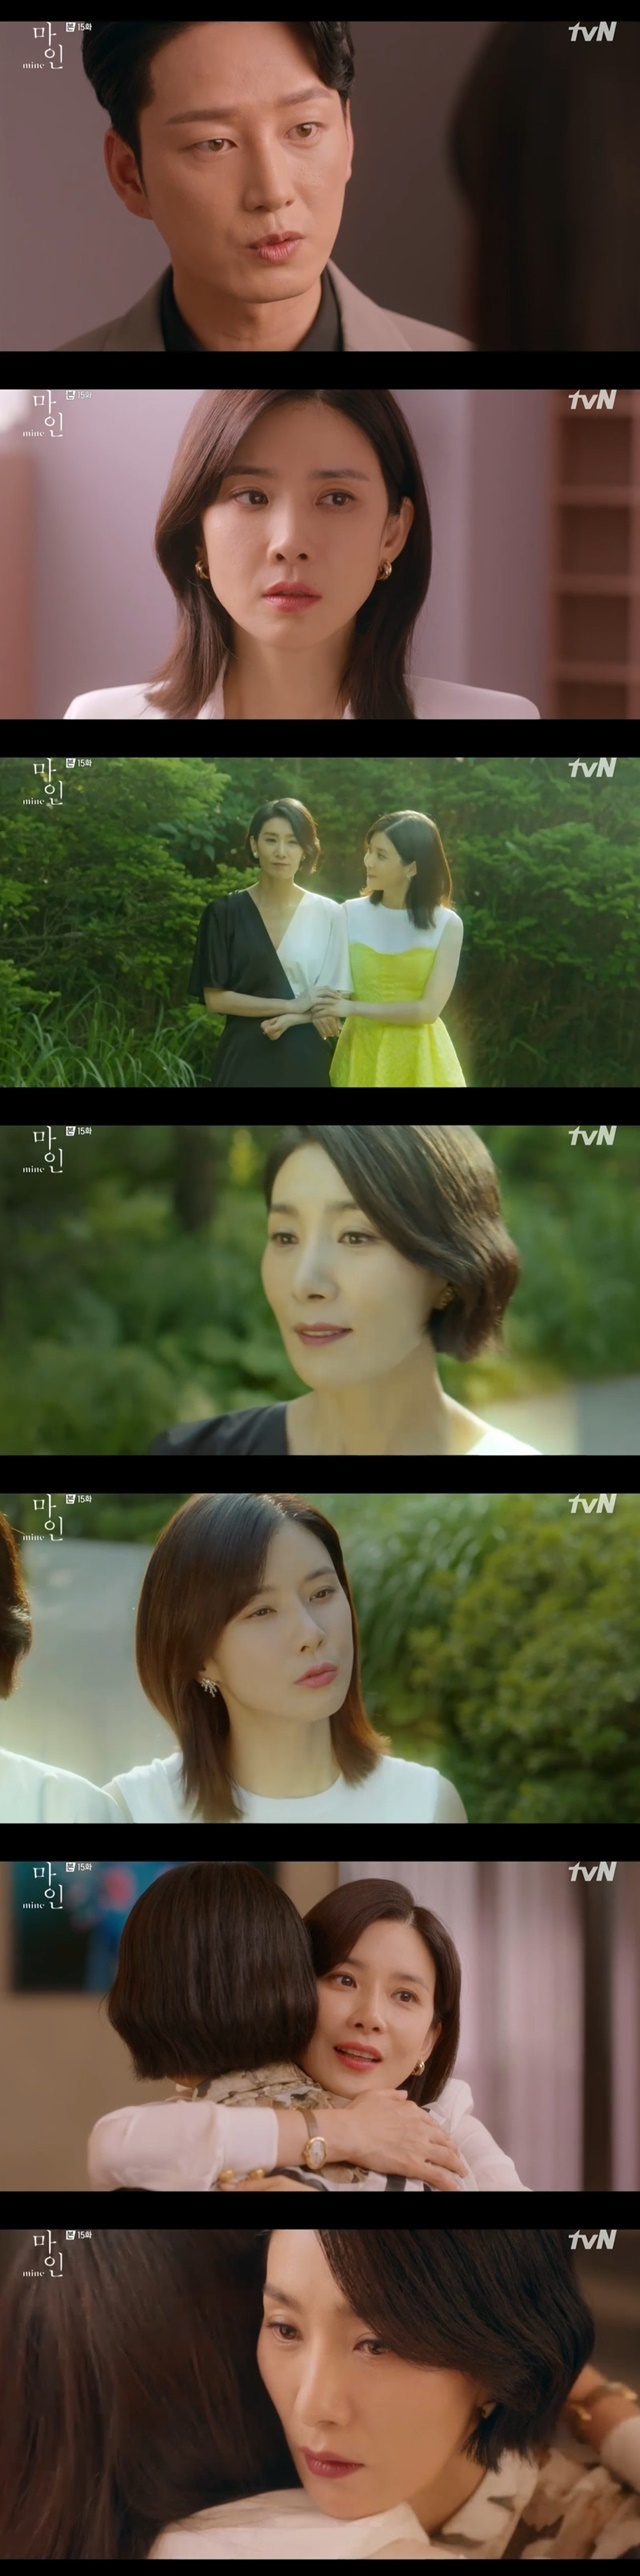 Lee Bo-young was fond of knowing Kim Seo-hyunggs SecretIn the 15th episode of TVNs Saturday, Drama Mine (played by Baek Mi-kyung/directed by Lee Bo-young), which was broadcast on June 26, Seo Hee-soo knew the secret of Kim Seo-hyung.Han Ji-yong (Lee Hyun-wook) angered his wife Seo Hee-soo a day before her death, saying, Seo Hee-soo, Jeong Seo-hyun, do you think you can ruin me? You did this by turning the video of Lee Hye-jin (Ok Ja-yeon)?Seo Hee-soo said, I just stopped Hyo-won from being the representative. Thats not all. Youre disqualified. You killed people. You going to police tomorrow?Hyowons legal team will not help you. Show him your best father for him. Confess and acknowledge all sins.Han Ji-yong said, You want to ruin me, you want to take Ha Jun-yi, and Jeong Seo-hyeon wants to take Hyo-won. Neither can.You, who didnt mix a drop of blood with Ha Jun-i, and the sexual minority, Jeong Seo-hyeon, will not have mine either. No, not before I die.Seo Hee-soo heard Han Ji-yong and found out that his brother, Jeong Seo-hyun, was a sexual minority. Seo Hee-soo remembered that Jeong Seo-hyun said, I did not have a boyfriend but I had a lover.